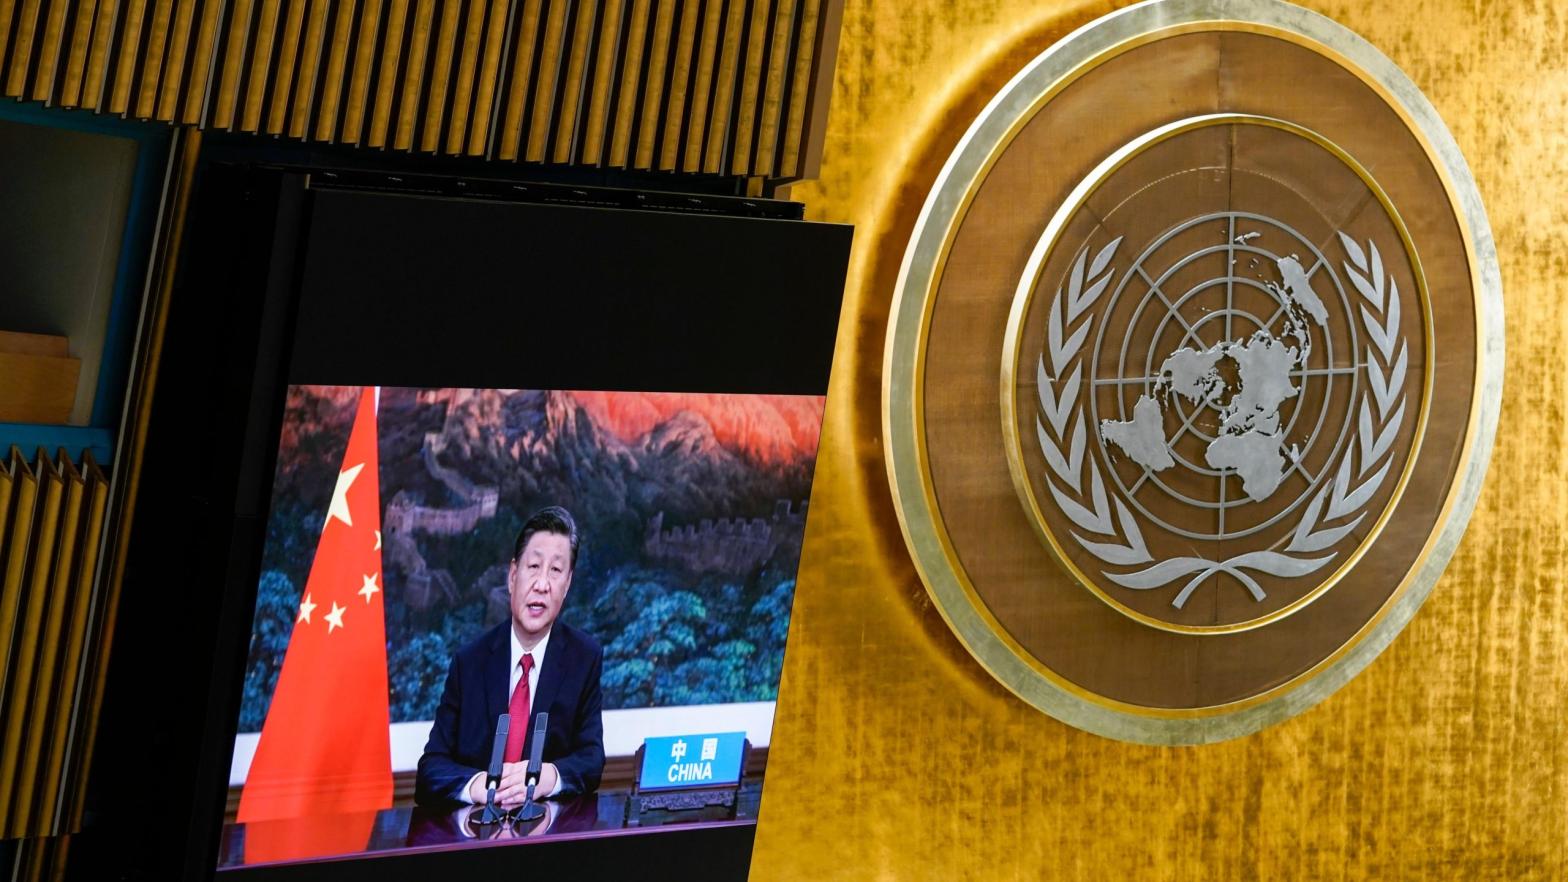 China's President Xi Jinping remotely addresses the 76th session of the United Nations General Assembly in a pre-recorded message. (Image: Mary Altaffer, AP)